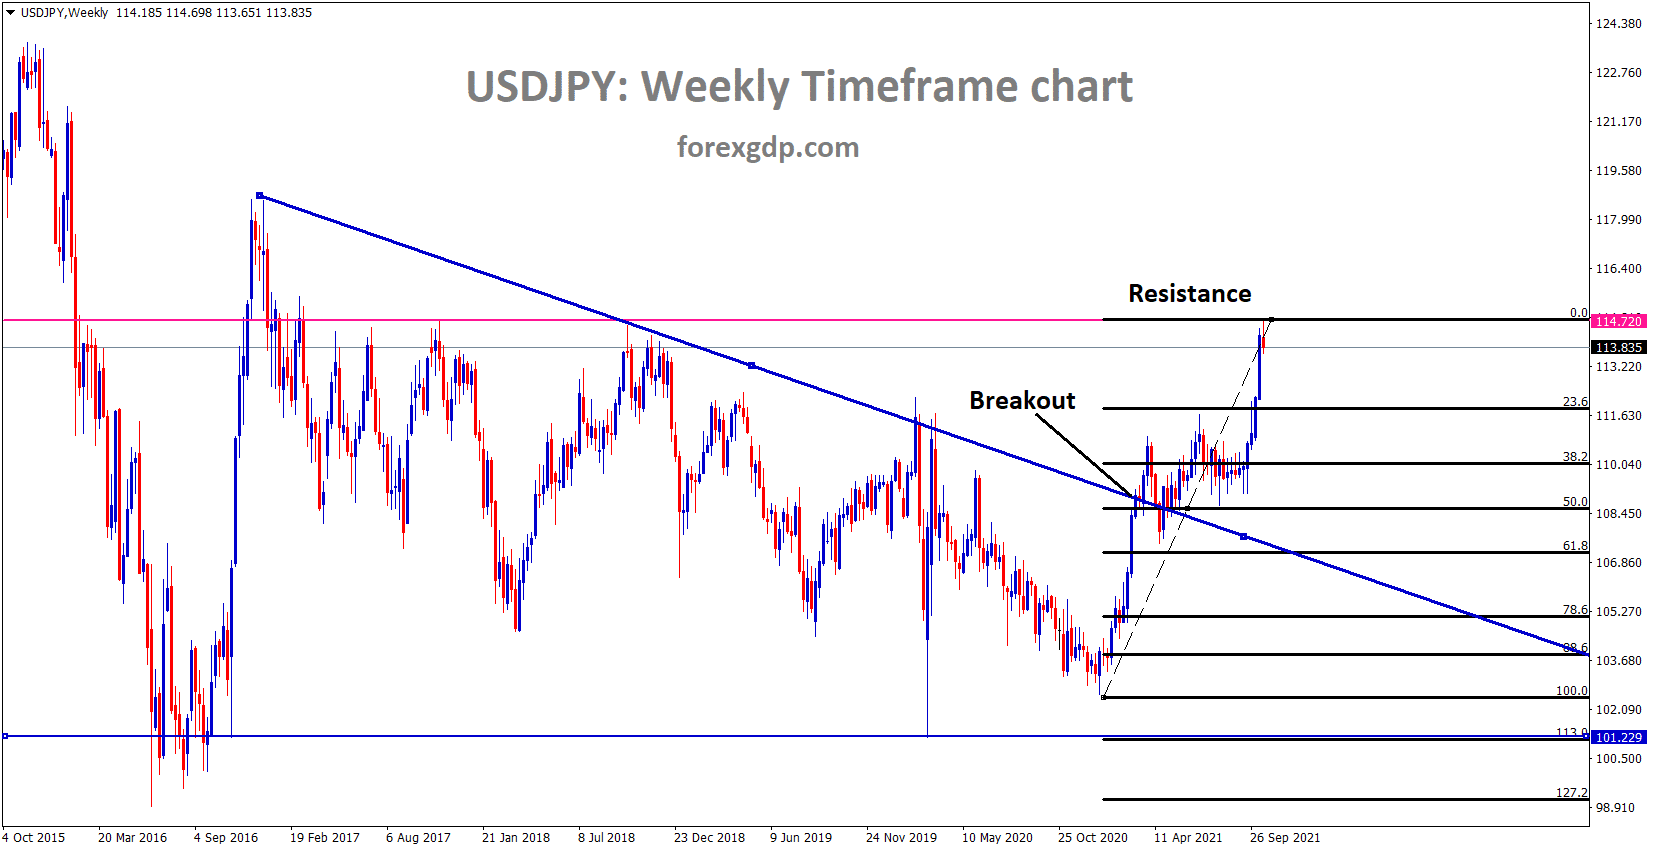 USDJPY is making a correction from the major resistance area